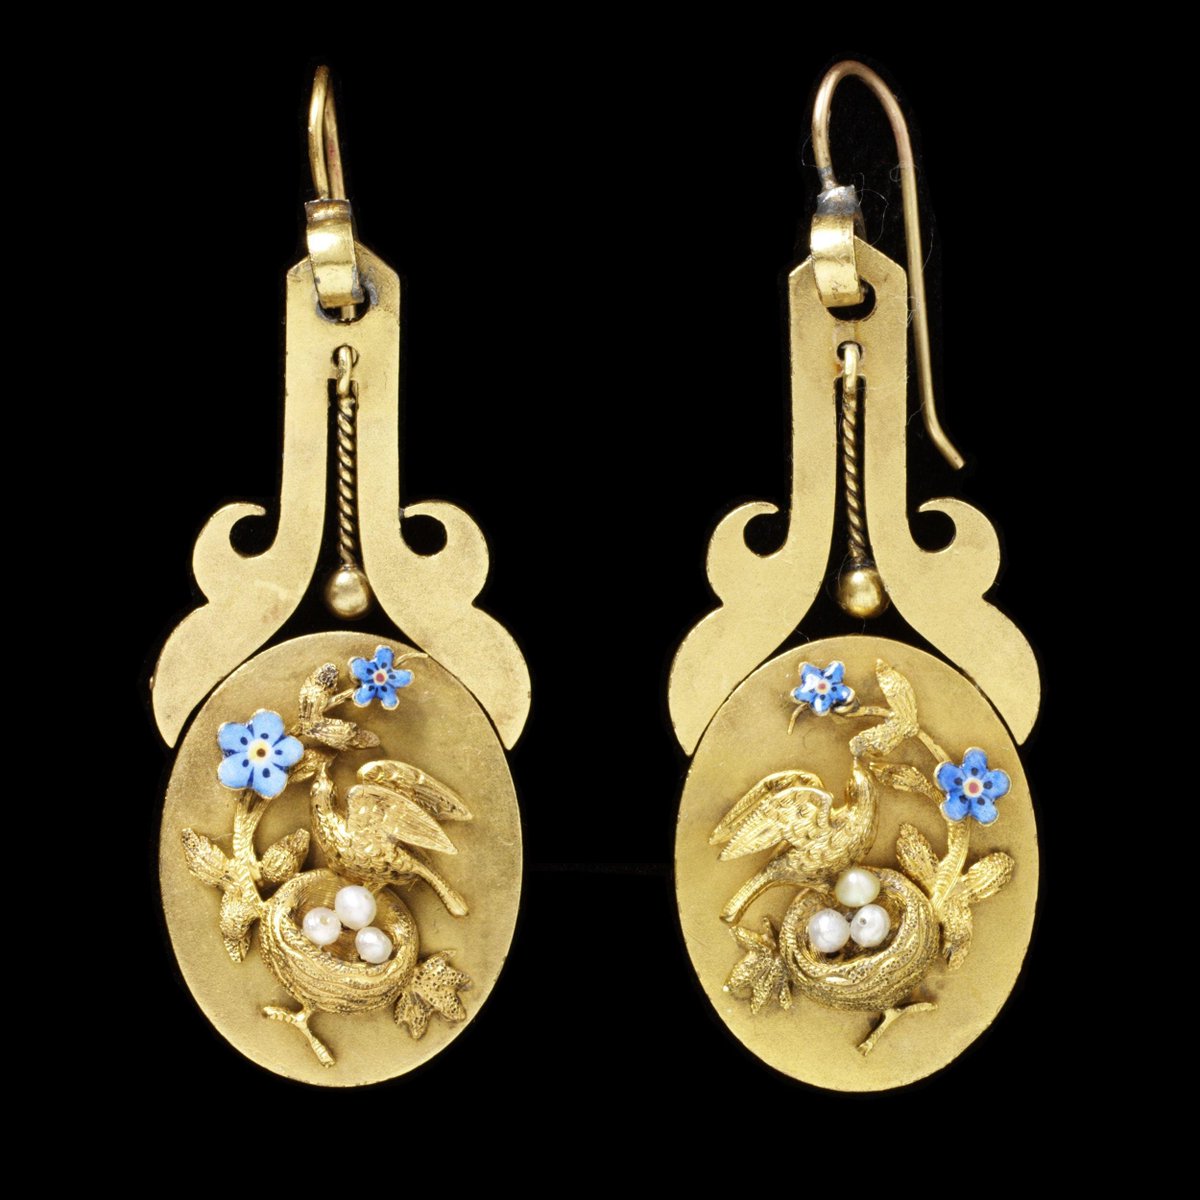 Pair of earrings, gold plaques decorated with compositions of a bird, a nest with eggs, and forget-me-nots, London, England, about 1860-70. Victoria & Albert Museum.